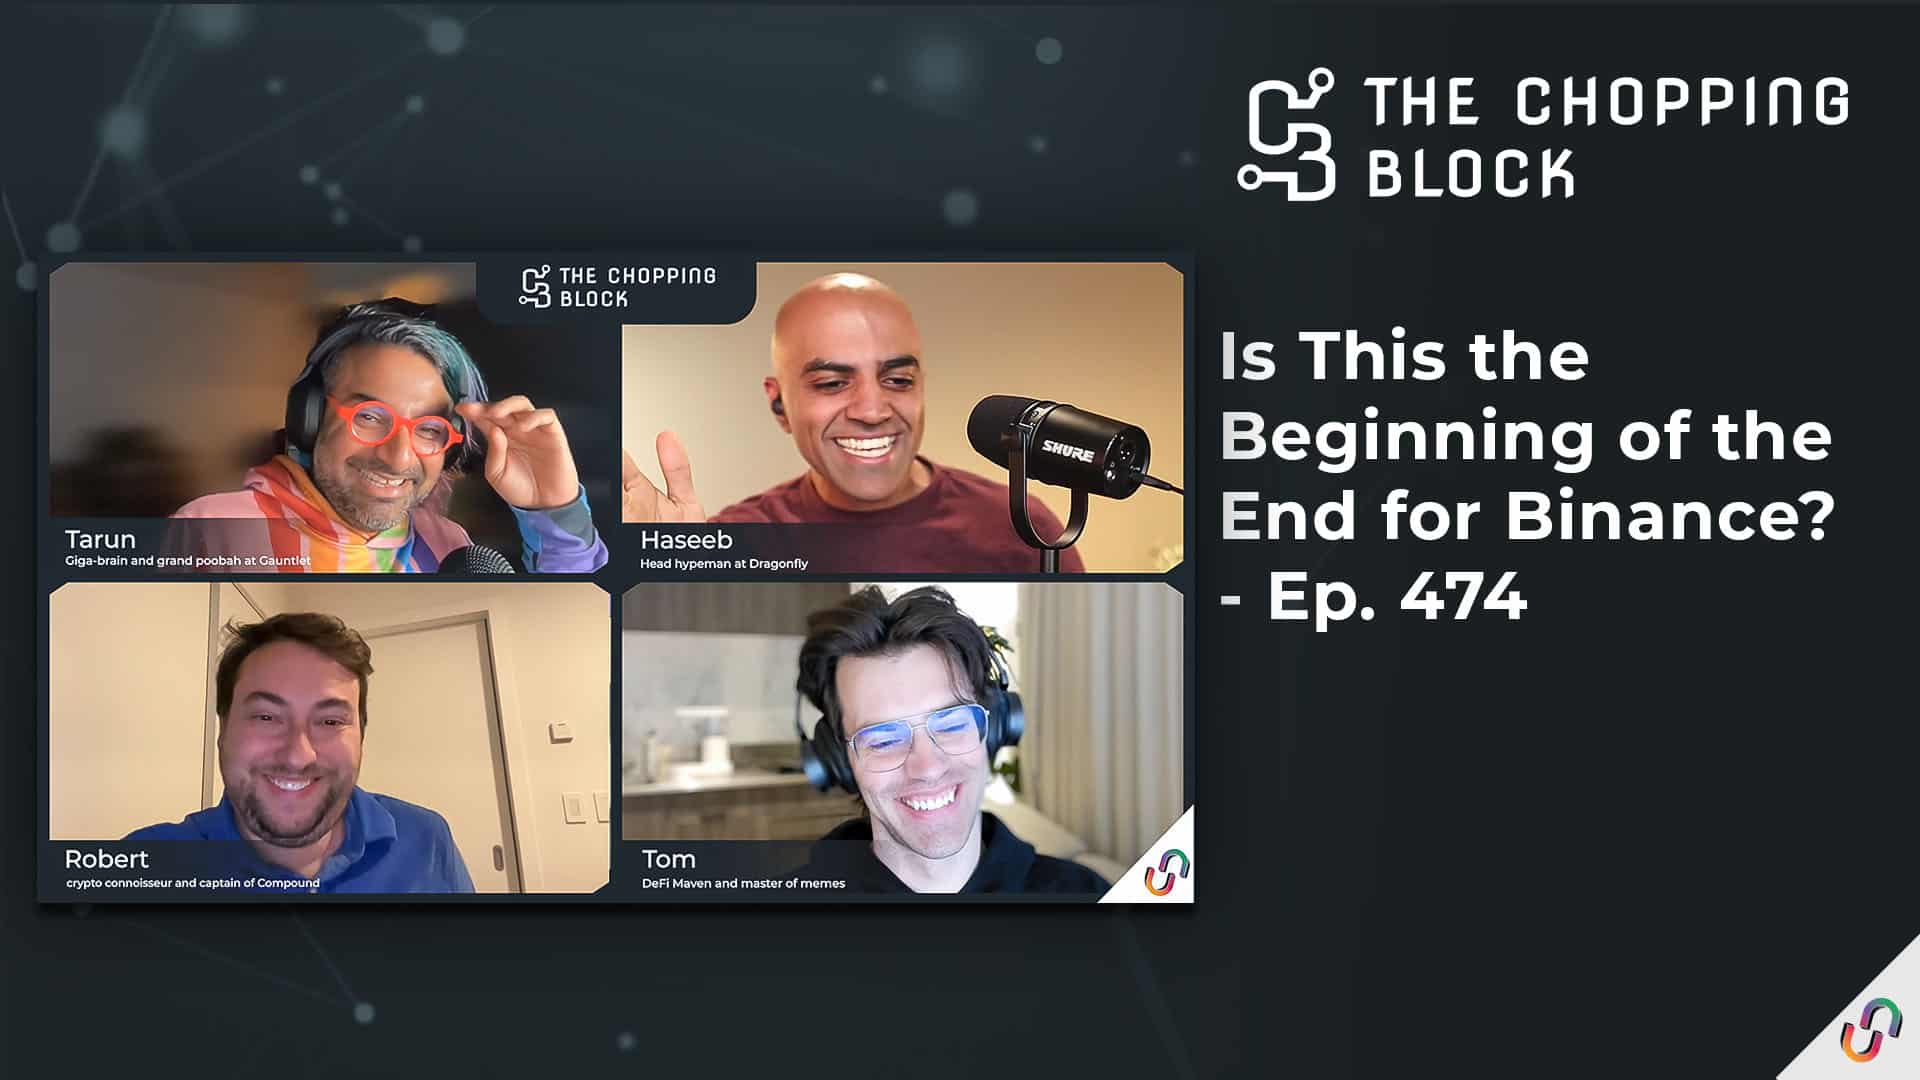 The Chopping Block: Is This the Beginning of the End for Binance? - Ep. 474